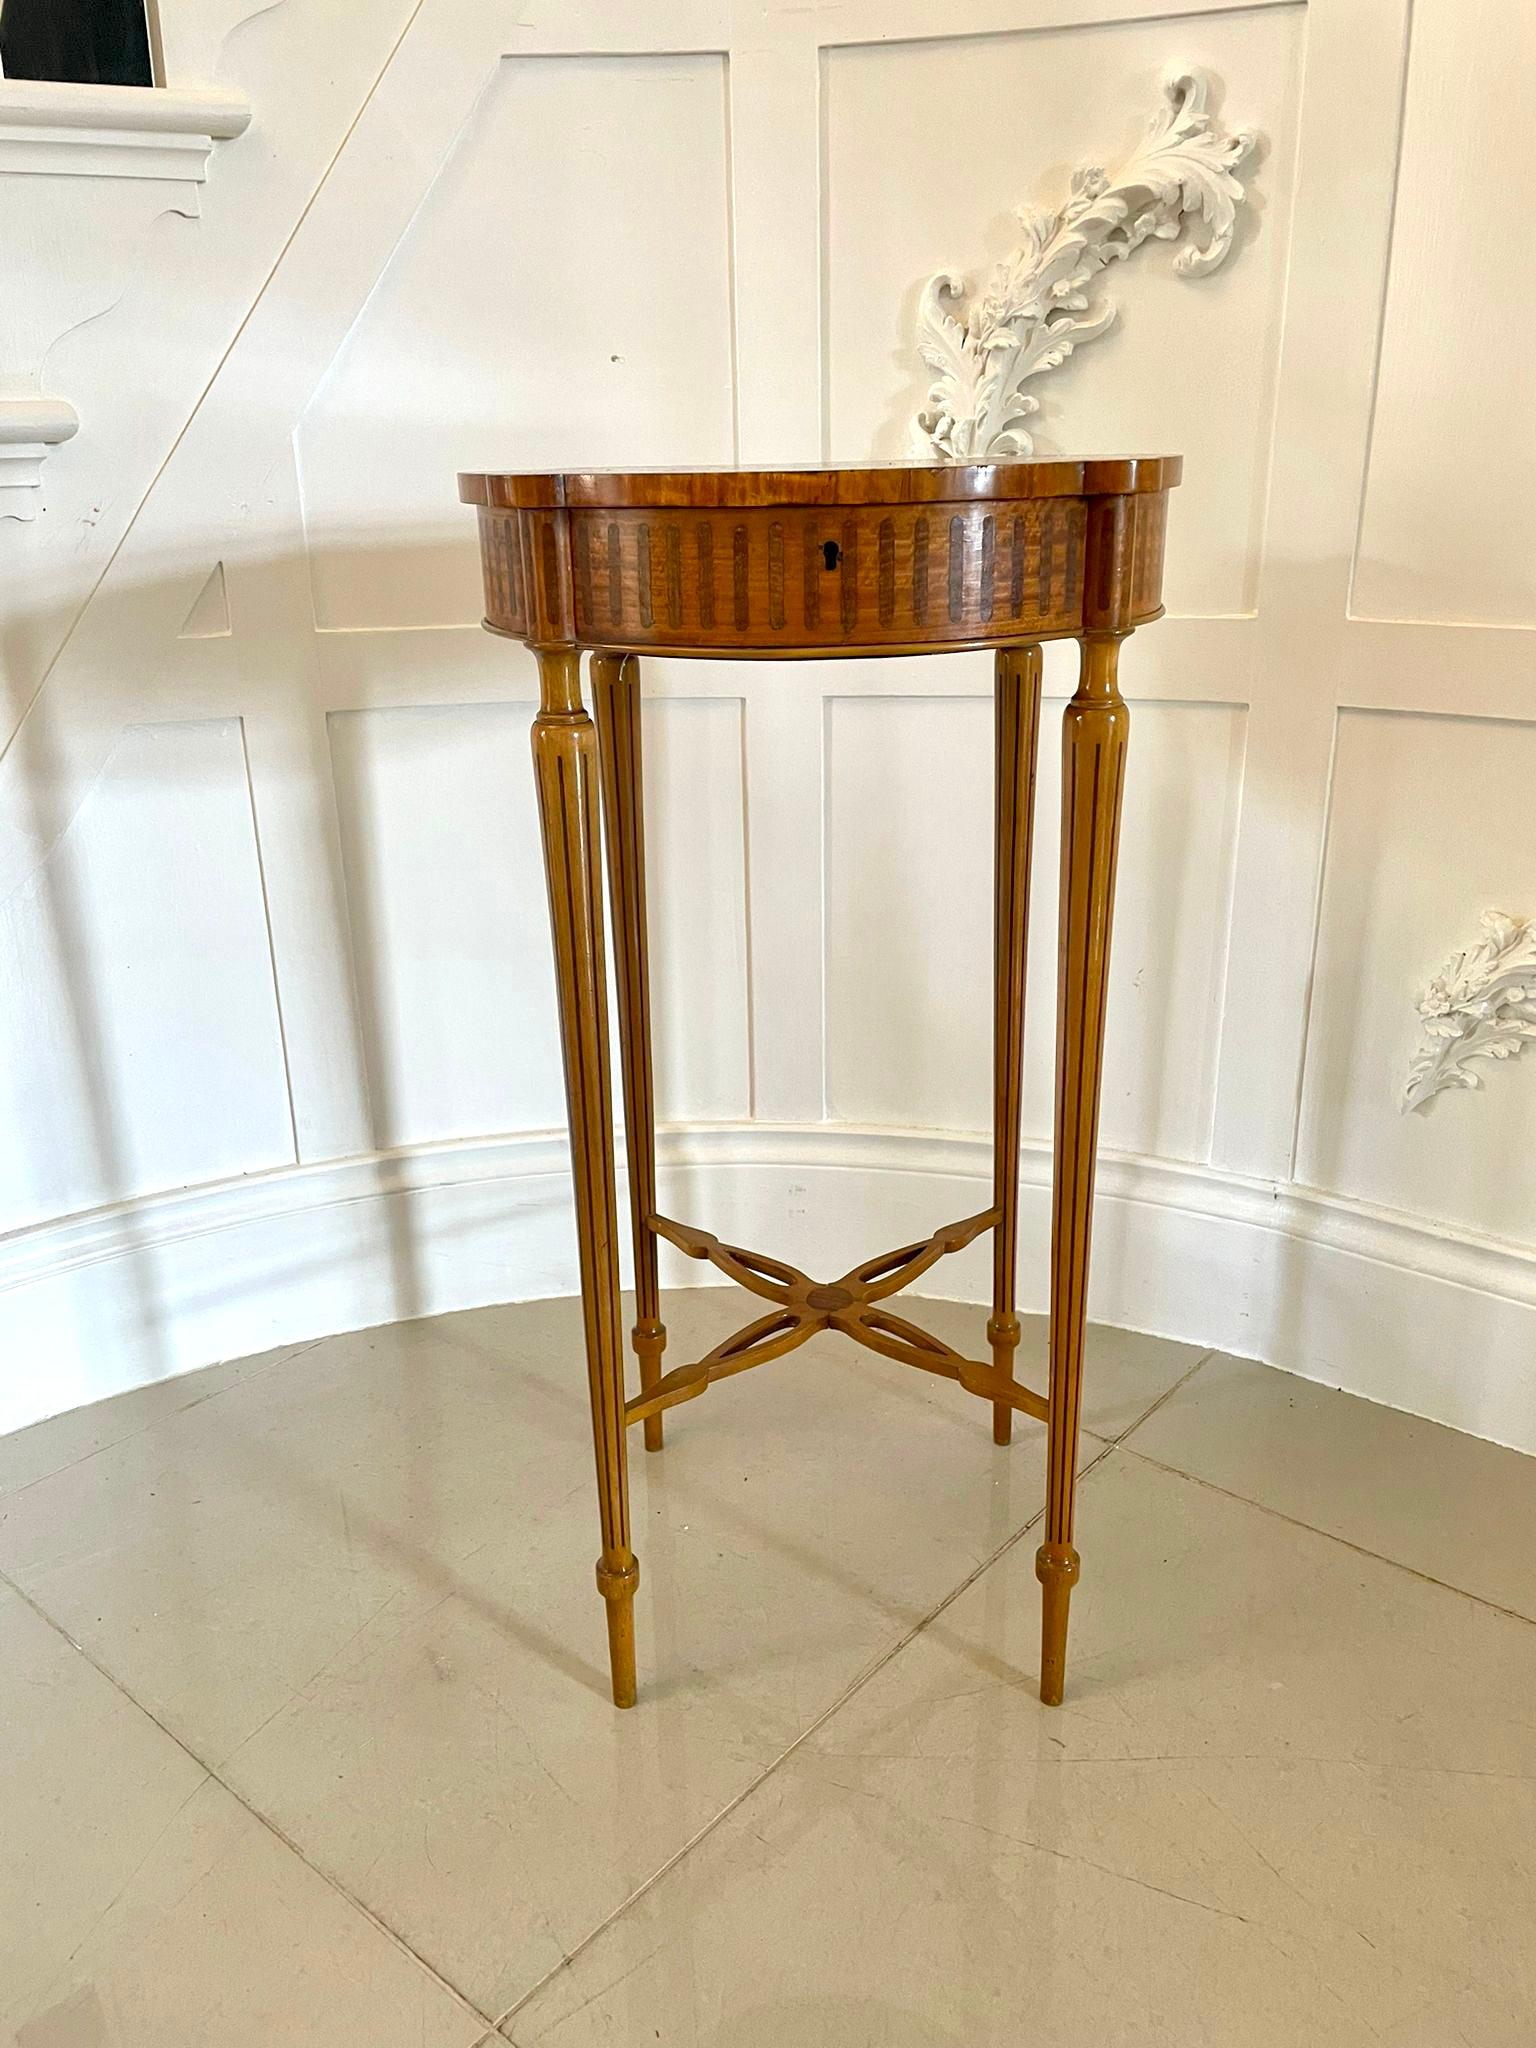 Fine Quality Antique Inlaid Satinwood Centre Table In Good Condition For Sale In Suffolk, GB